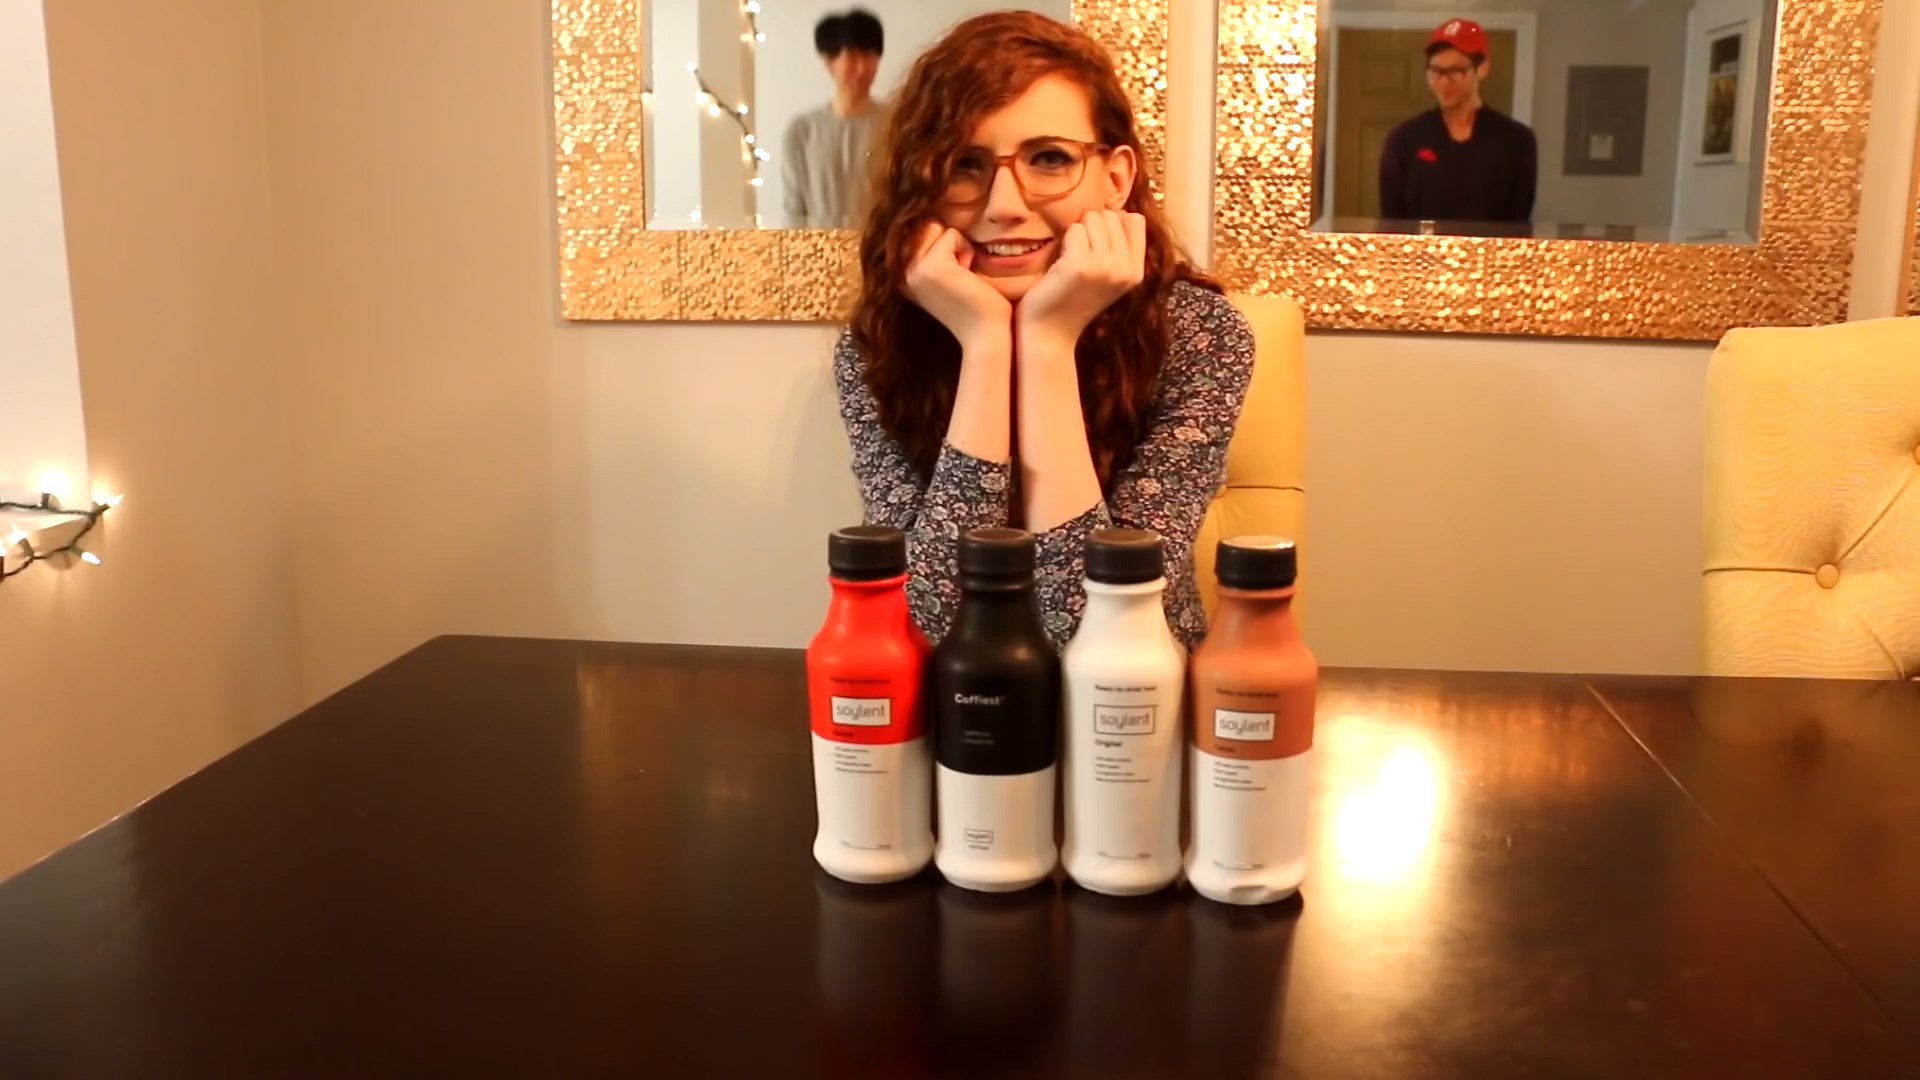 Taste Test And Review Of All Four Soylent Flavors 1080p - Tidecallernami